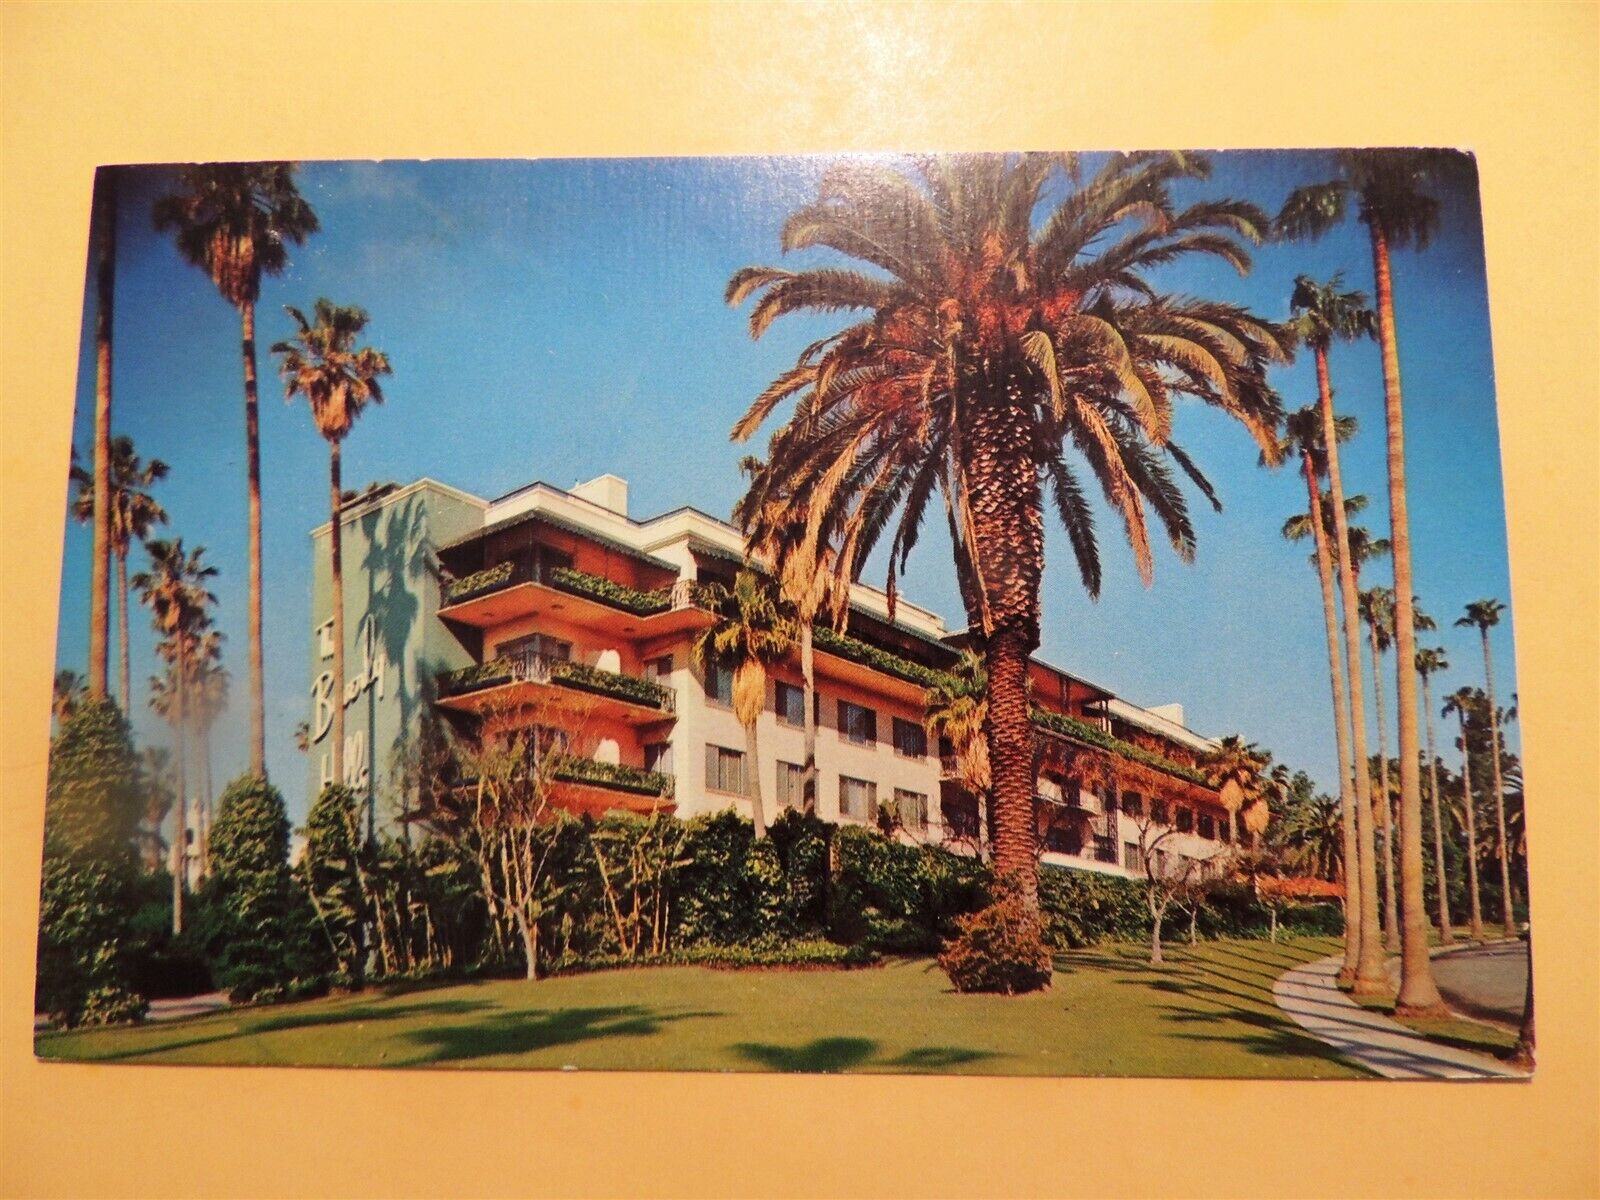 Beverly Hills Hotel & Bungalows Beverly Hills California vintage postcard 